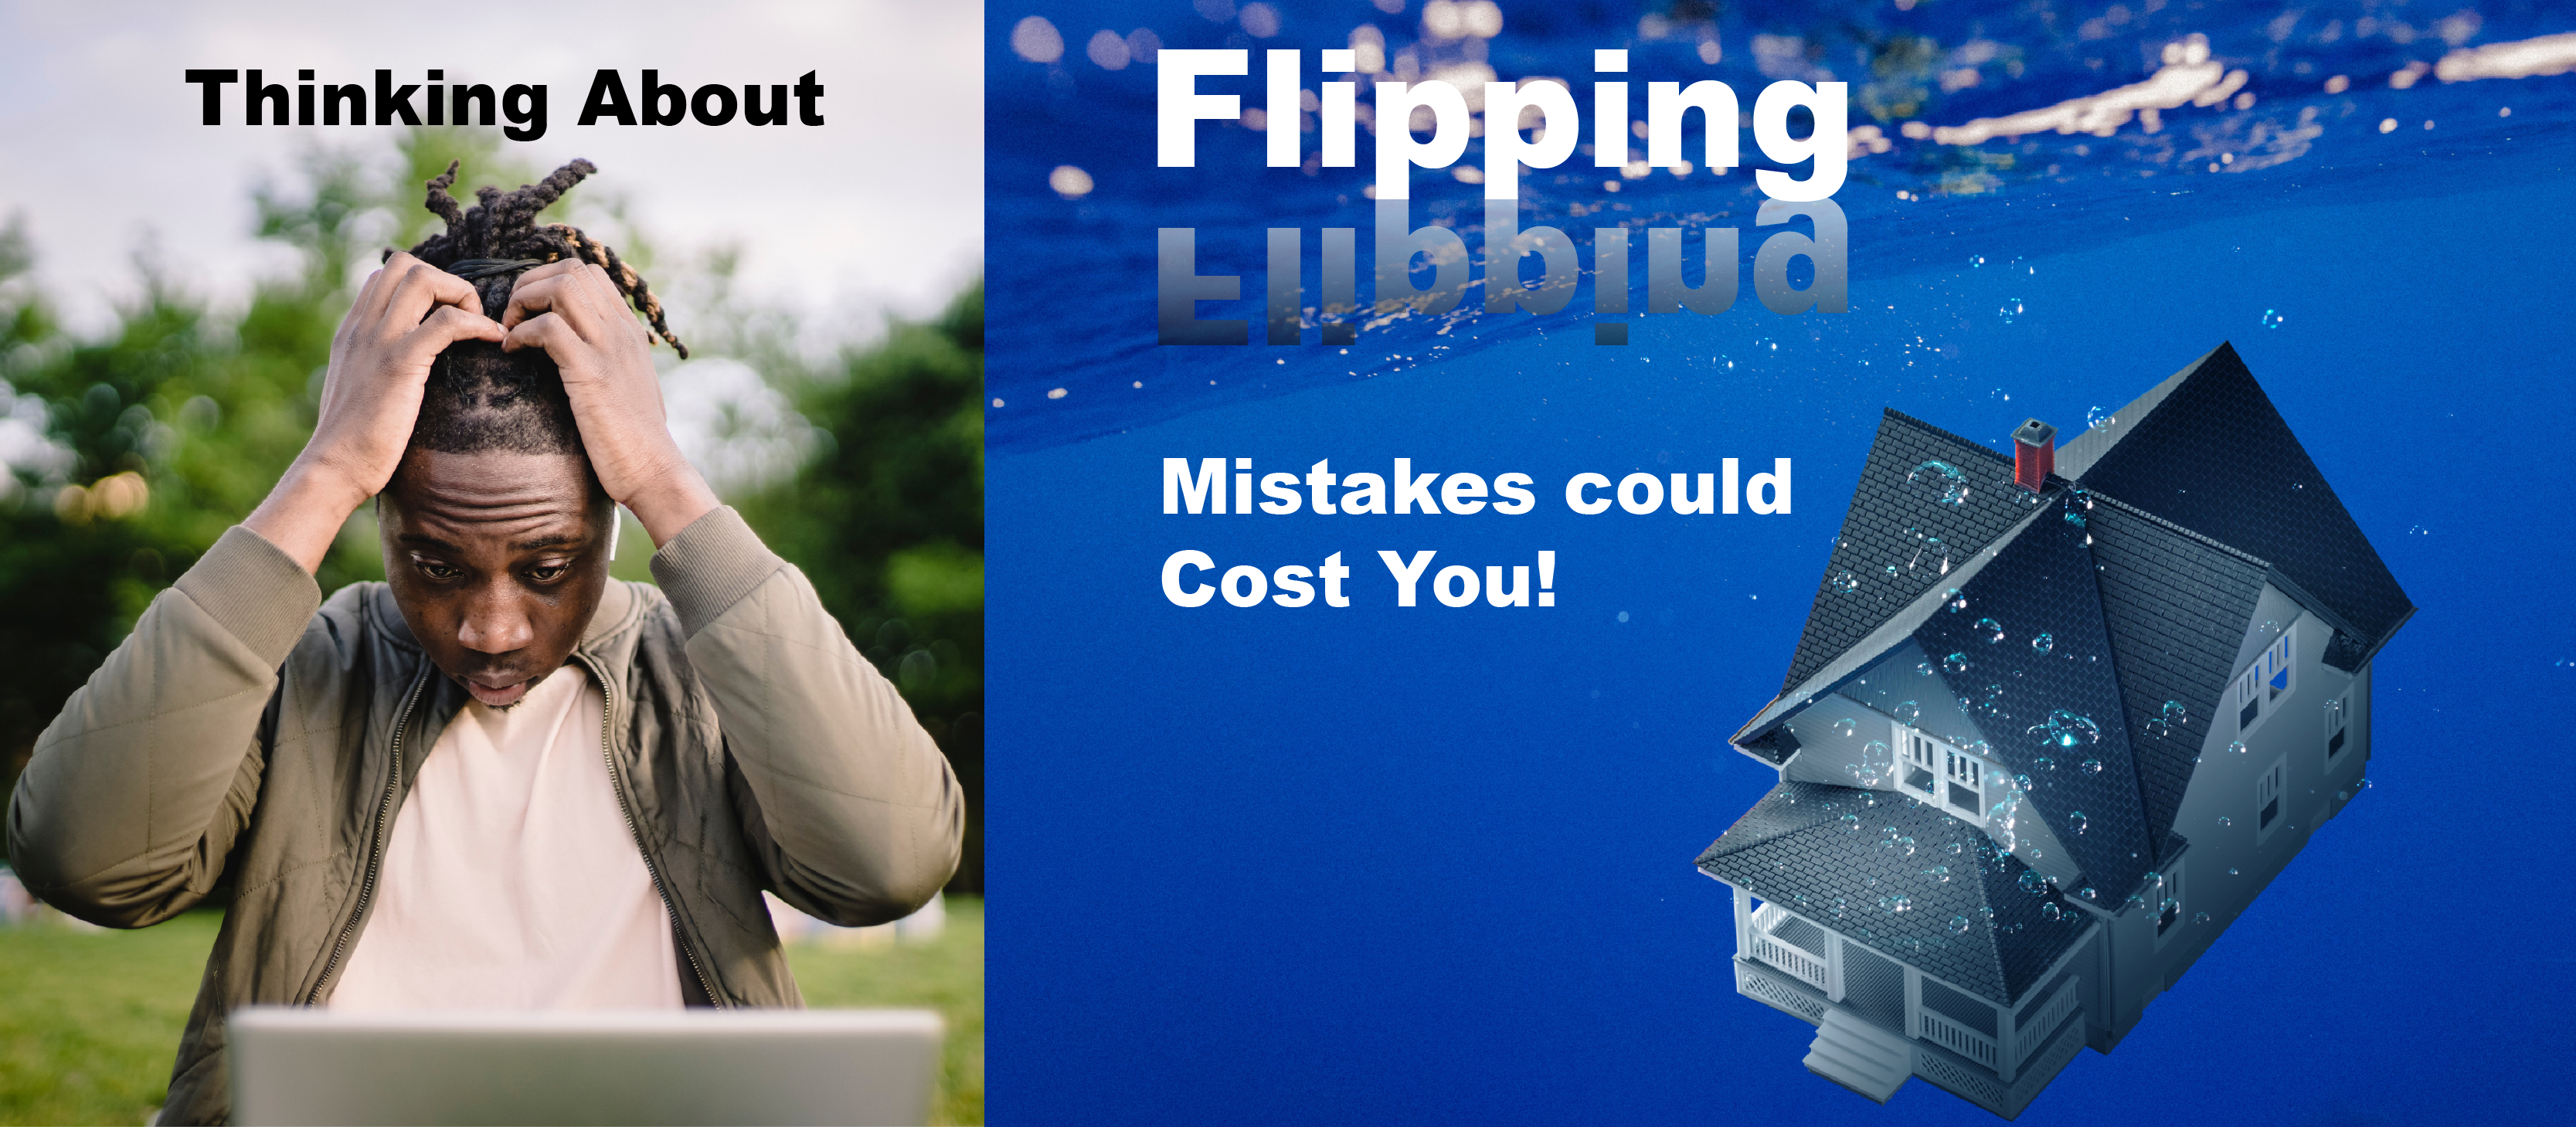 Thinking About Flipping-Mistakes could cost you.